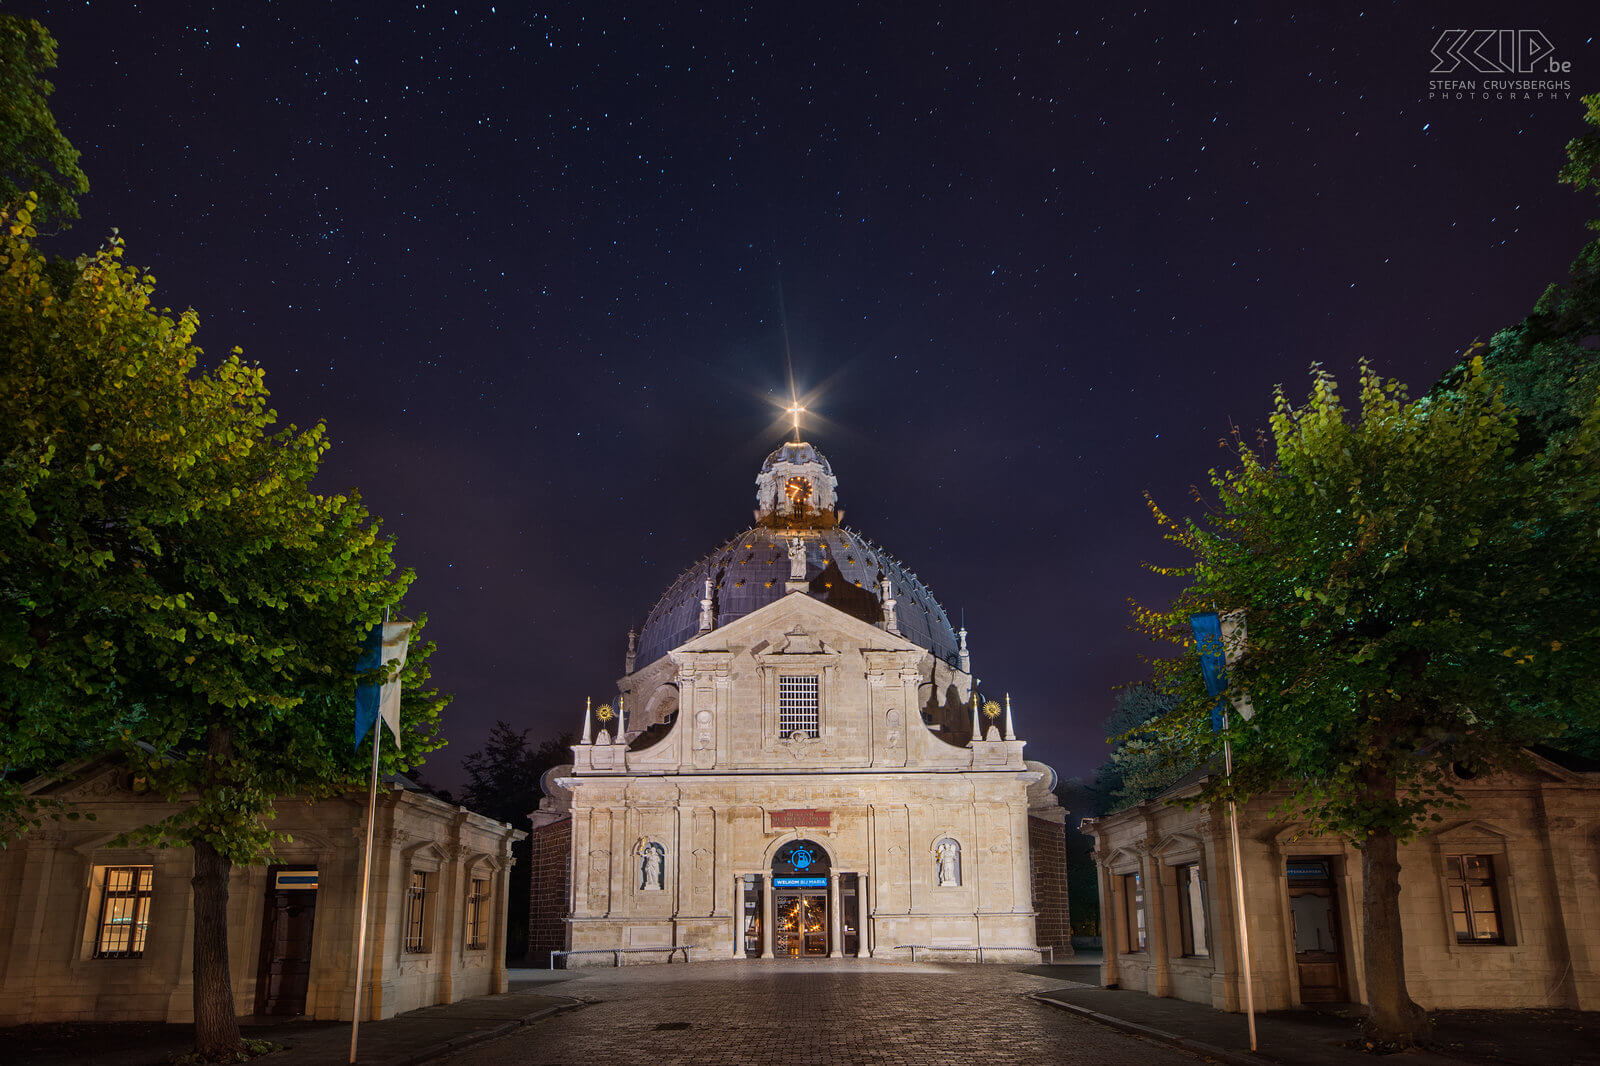 Hageland by night - Basilica of Scherpenheuvel The Baroque Basilica of Our Lady of Scherpenheuvel is one of the most important pilgrimage sites in Belgium. The church was consecrated in 1627 and the church was elevated to basilica in 1922. Stefan Cruysberghs